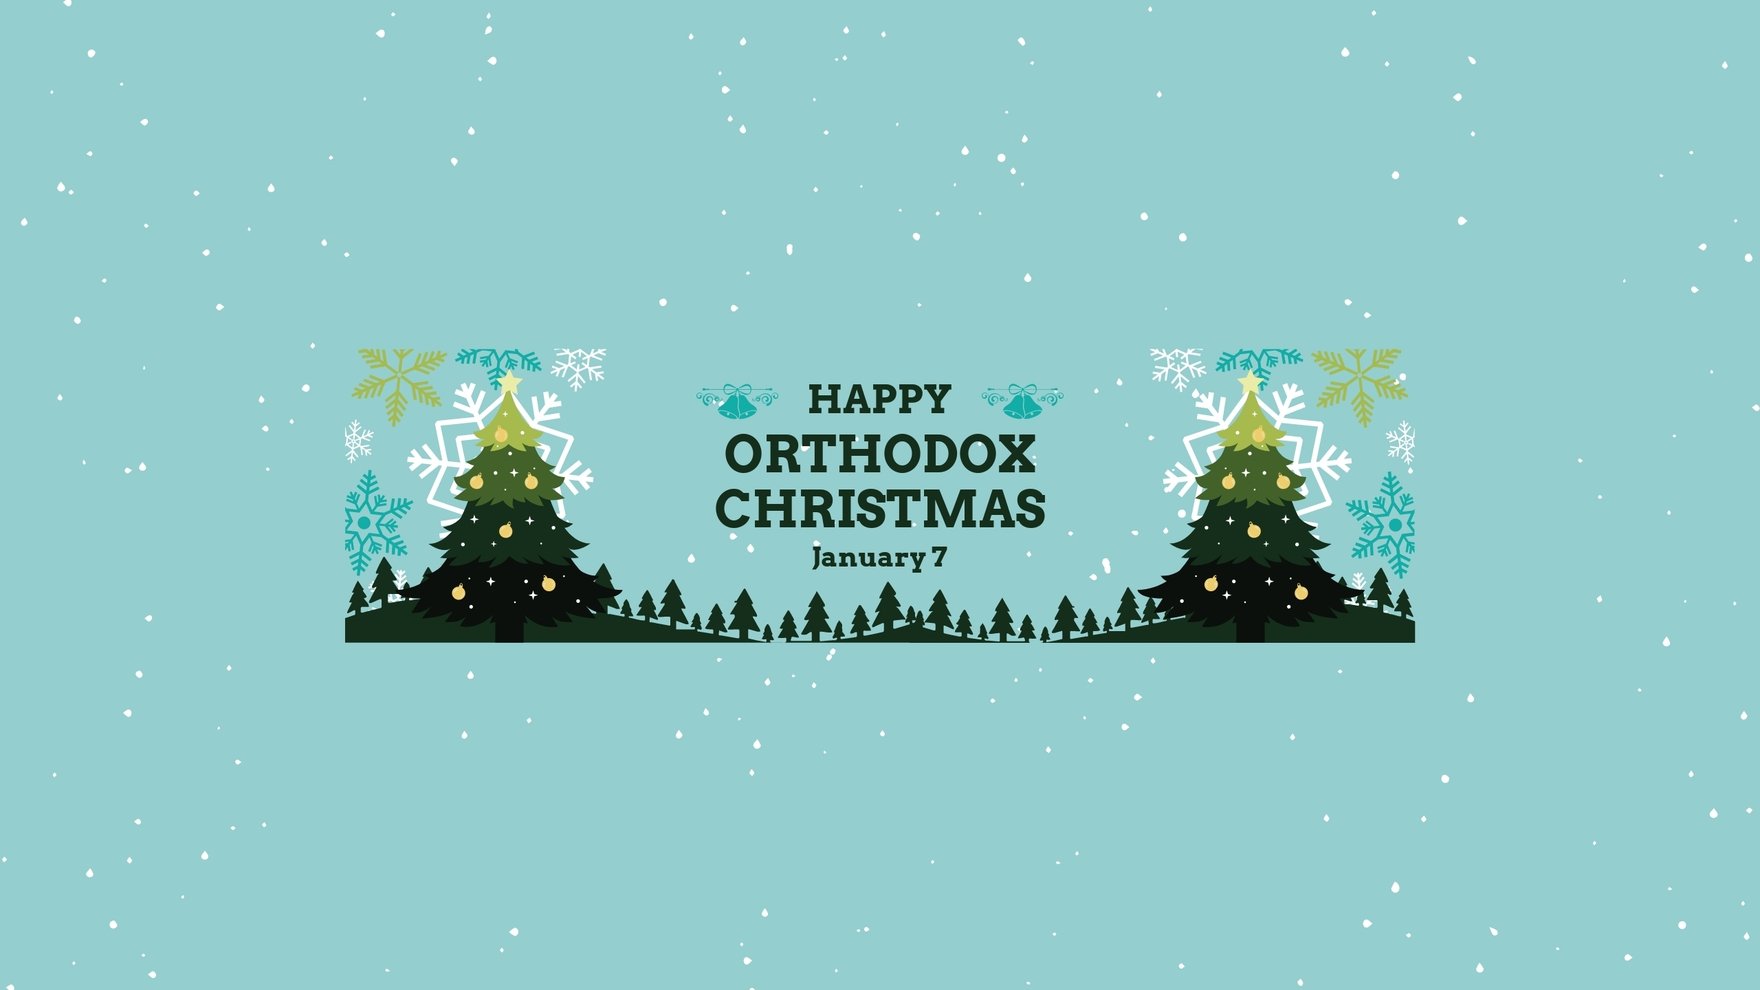 Happy Orthodox Christmas Youtube Banner Template